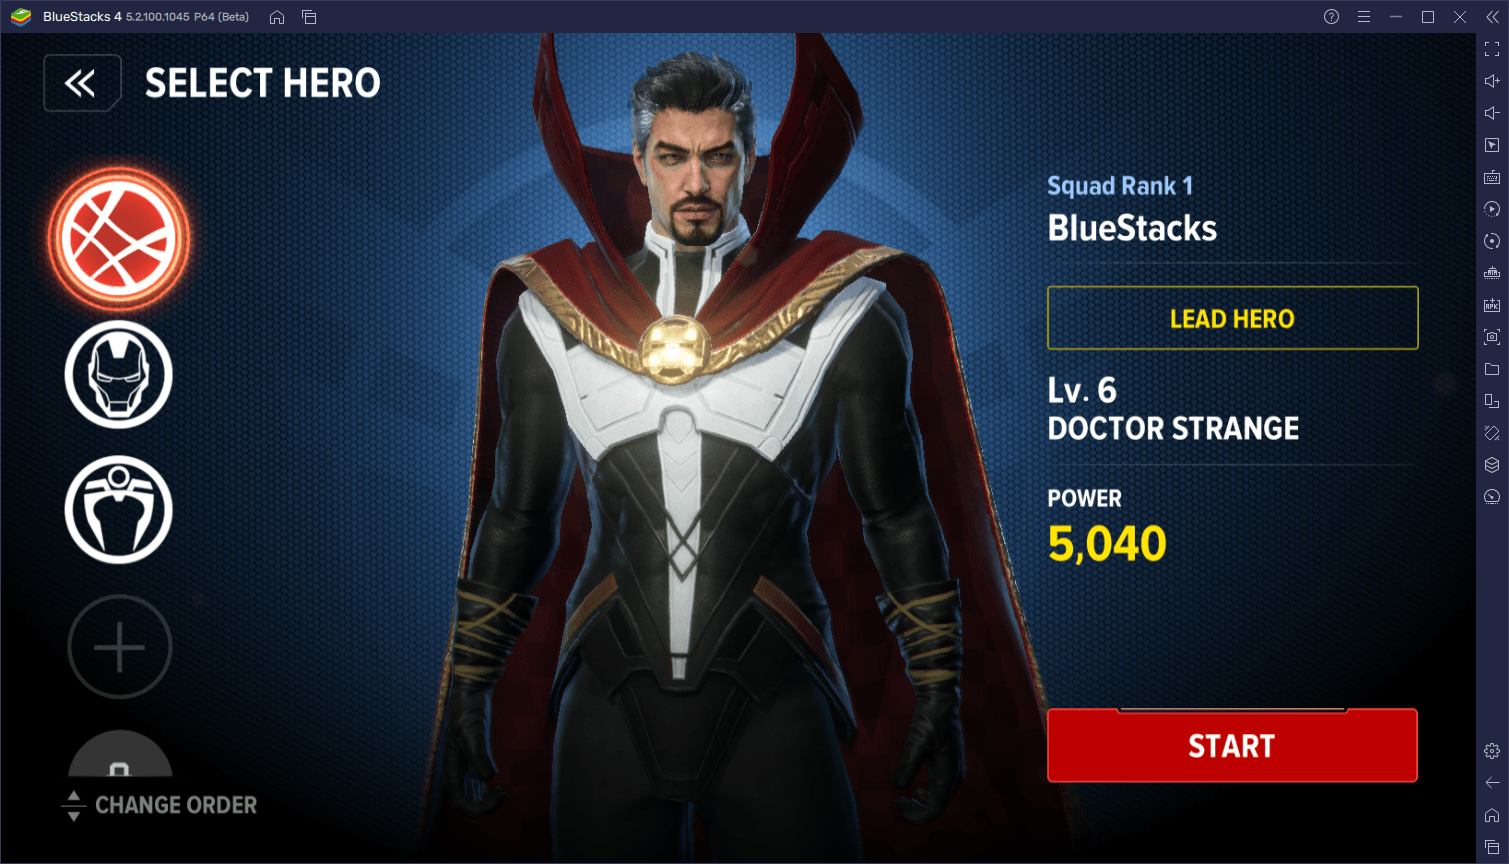 MARVEL Future Revolution on PC - Configuration Guide to get the Best Graphics and Performance